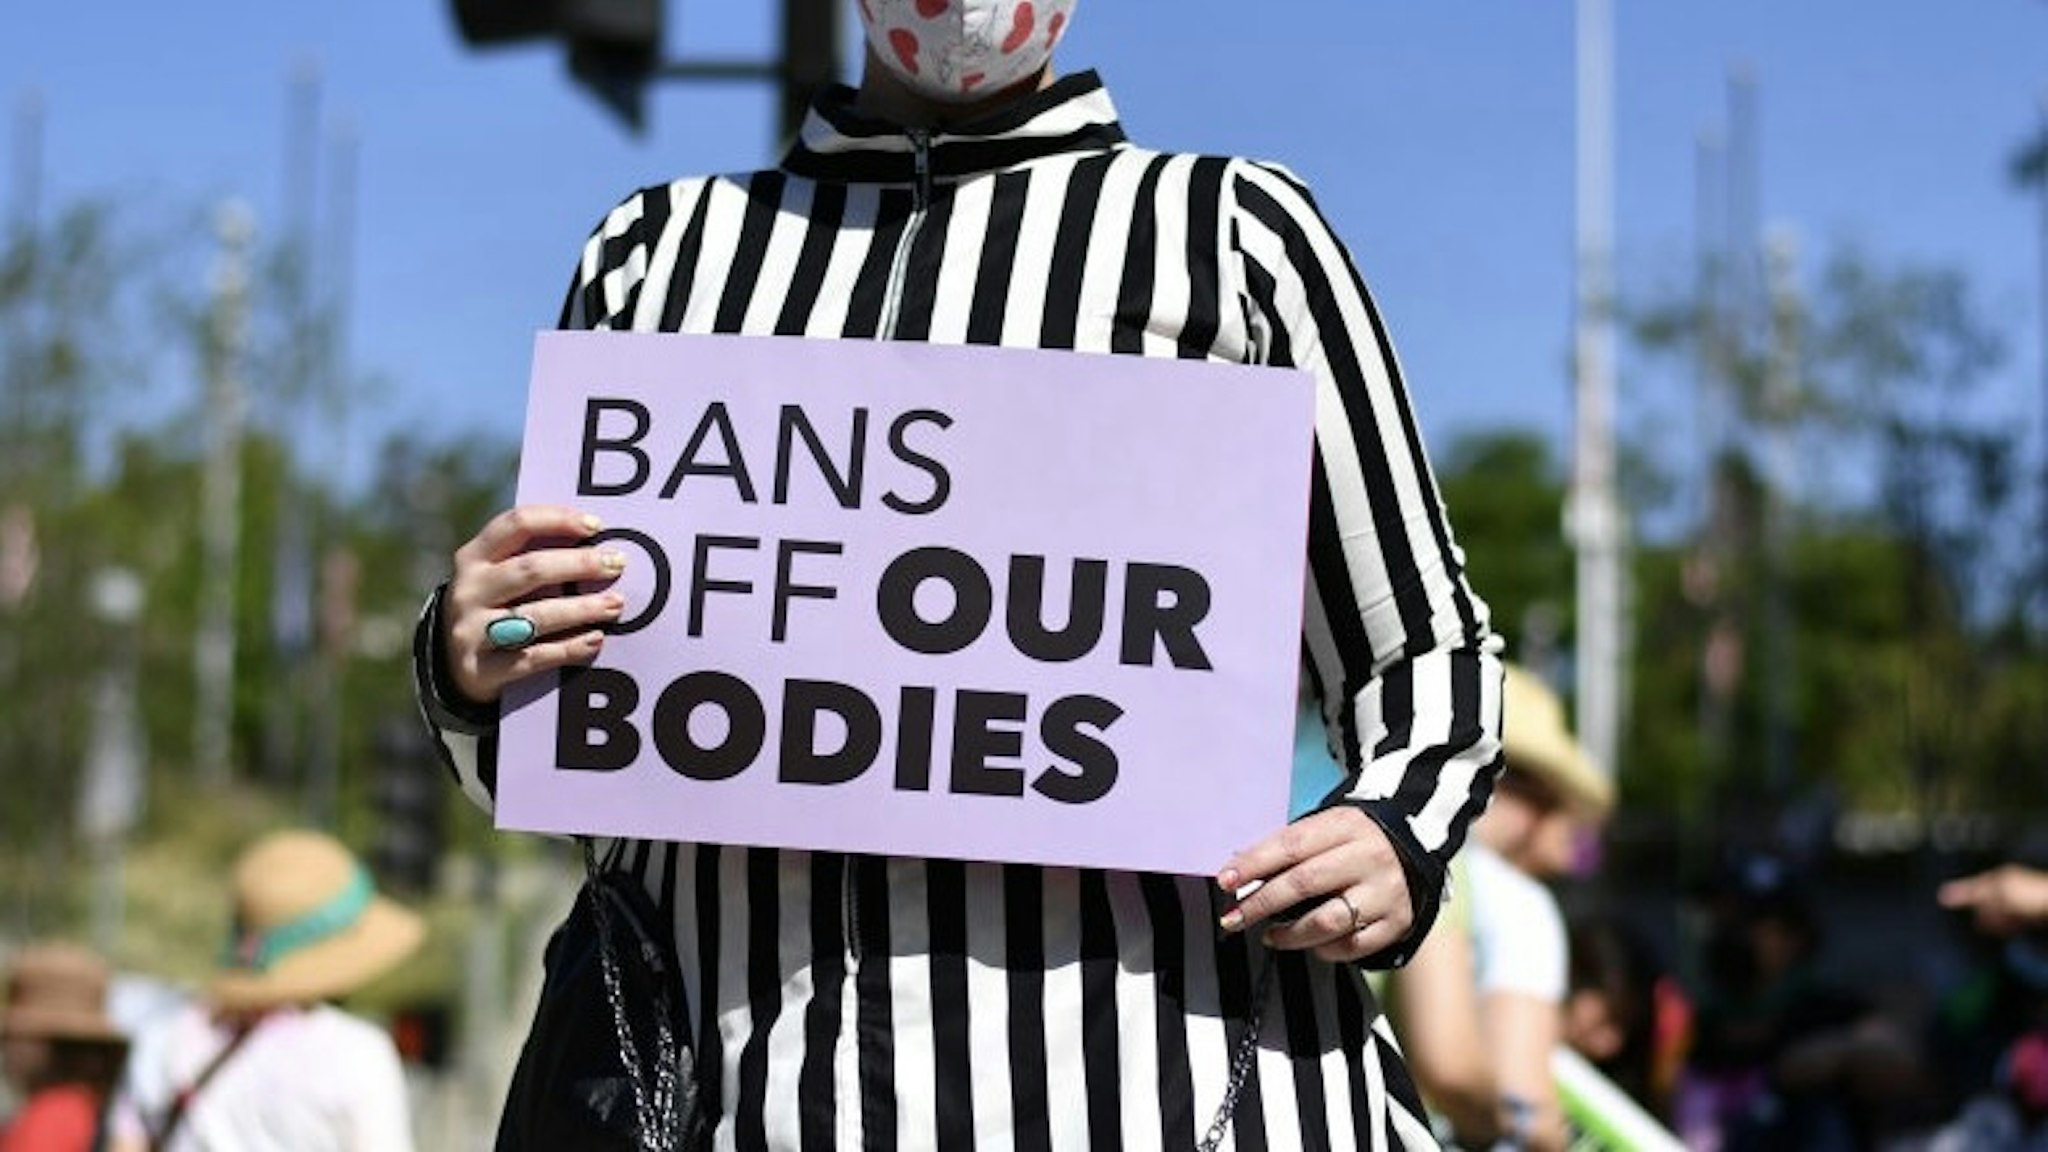 Women's March Foundation's National Day Of Action! The "Bans Off Our Bodies" Reproductive Rights Rally LOS ANGELES, CALIFORNIA - MAY 14: An abortion-rights protester attends the Women's March Foundation's National Day Of Action! The "Bans Off Our Bodies" reproductive rights rally at Los Angeles City Hall on May 14, 2022 in Los Angeles, California. In a leaked initial draft majority opinion obtained by Politico and authenticated by Chief Justice John Roberts, Supreme Court Justice Samuel Alito wrote that the cases Roe v. Wade and Planned Parenthood of Southeastern Pennsylvania v. Casey should be overturned, which would end federal protection of abortion rights across the country. (Photo by Sarah Morris/Getty Images) Sarah Morris / Contributor